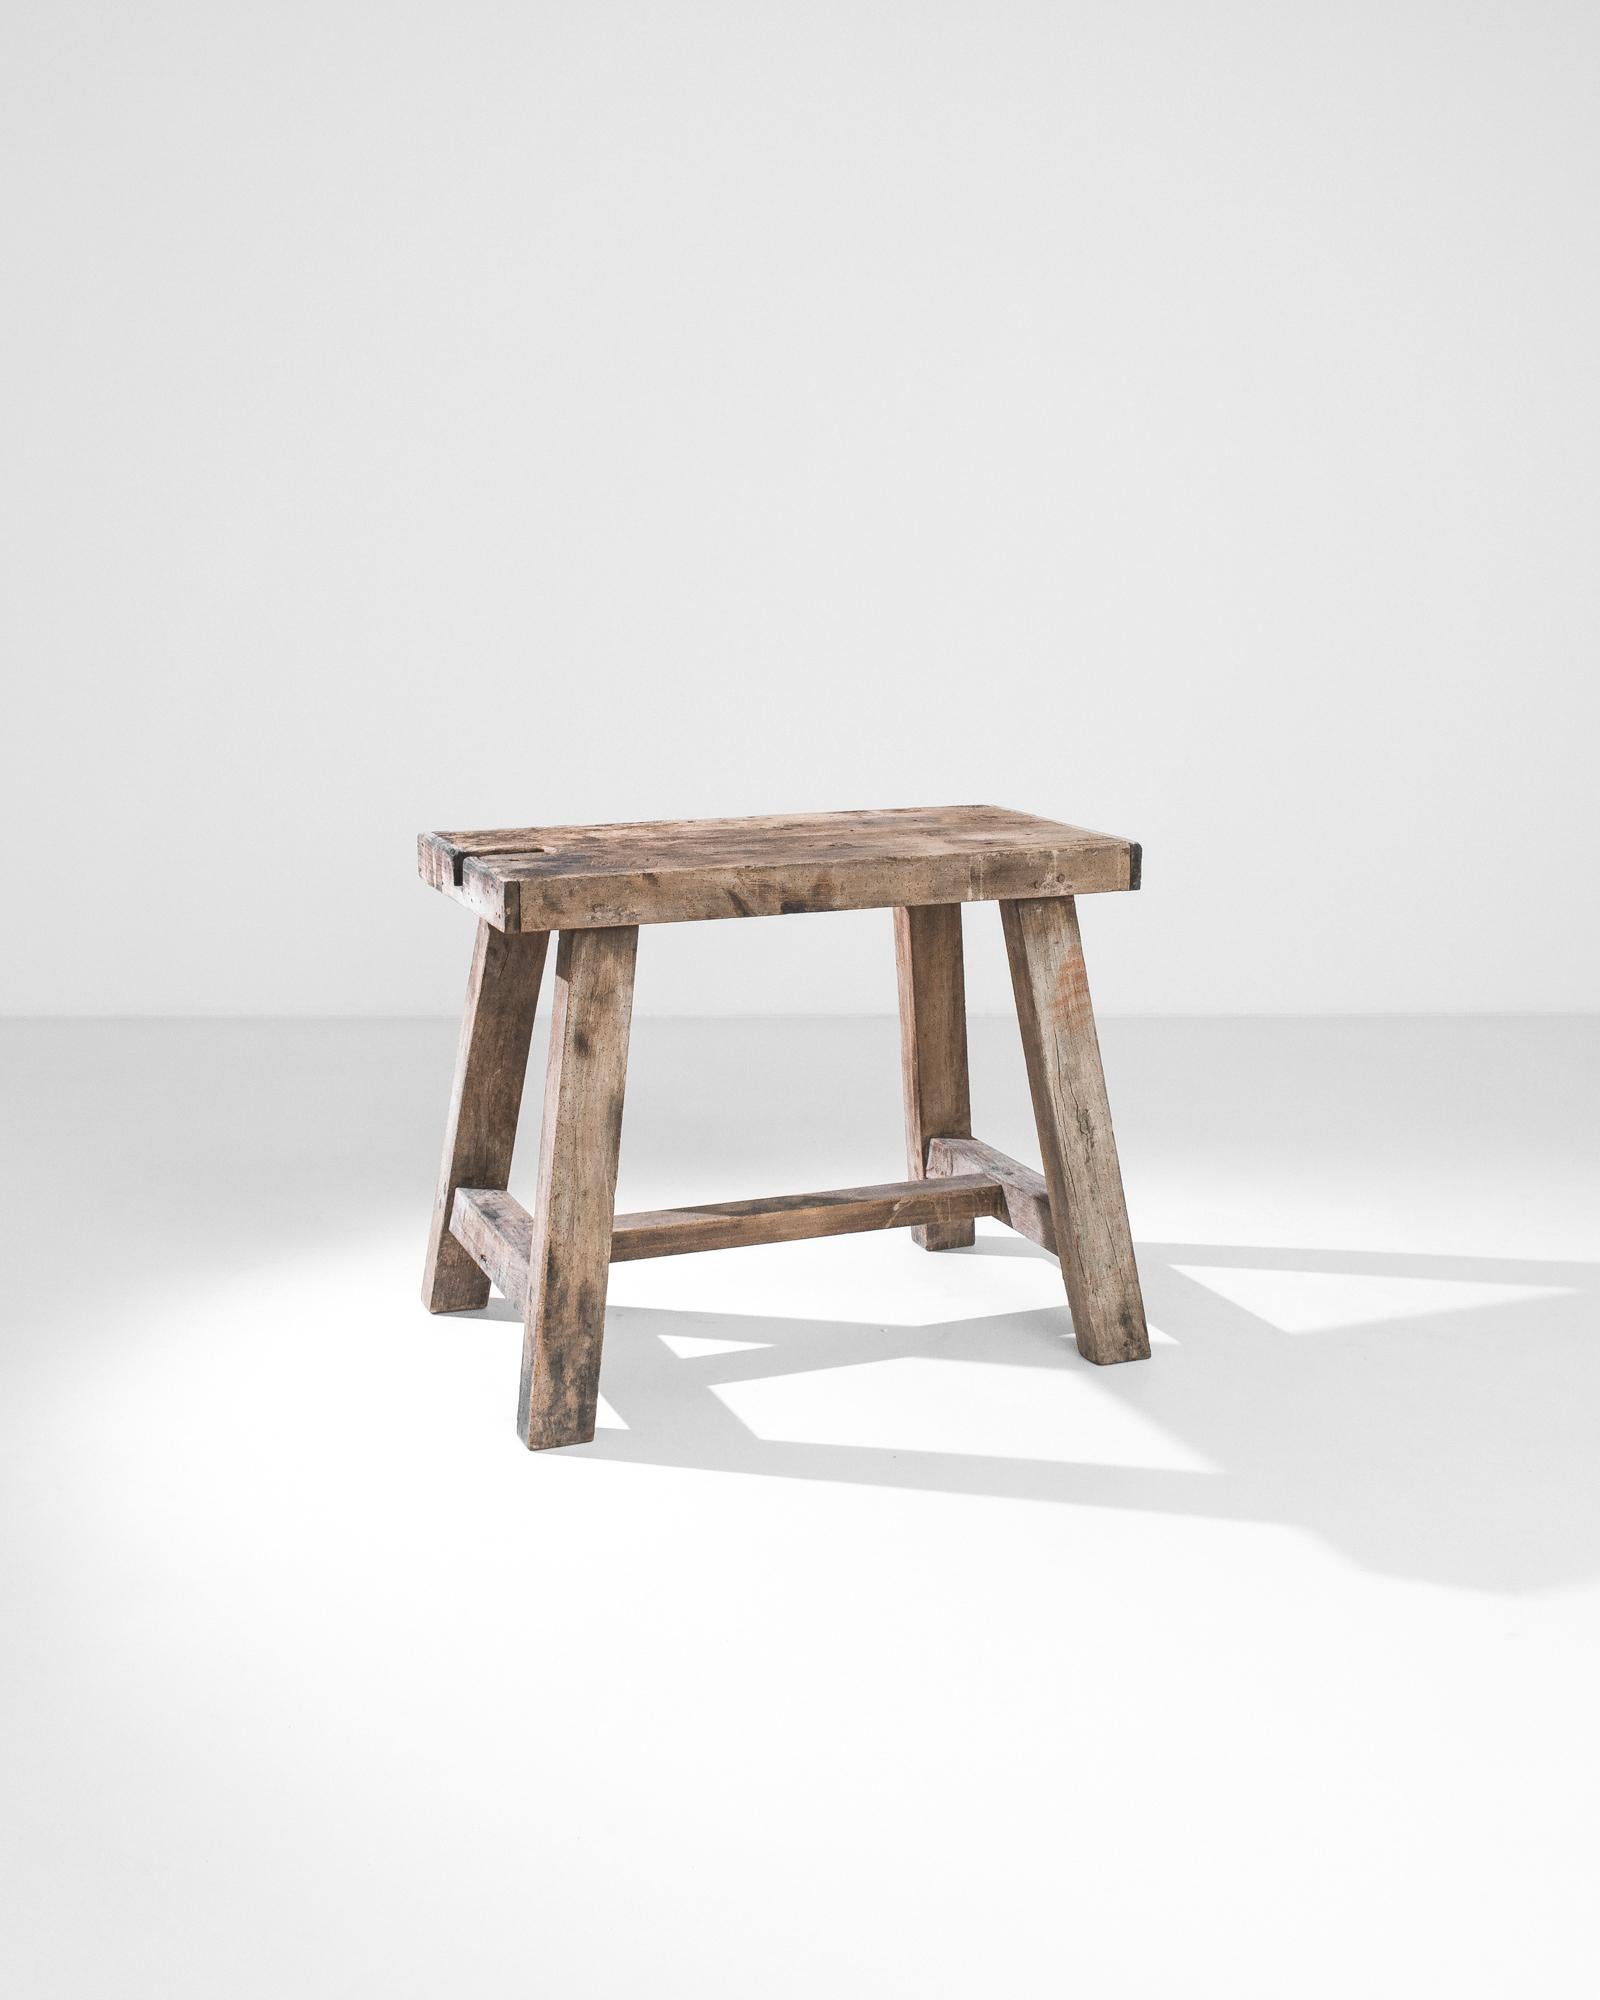 A wooden work table produced in France circa 1900. Four angled, rectangular legs connected by thick stretchers support a broad slab of working surface in its original patina. With a sturdy silhouette that shan’t be shaken by any trial or trouble,